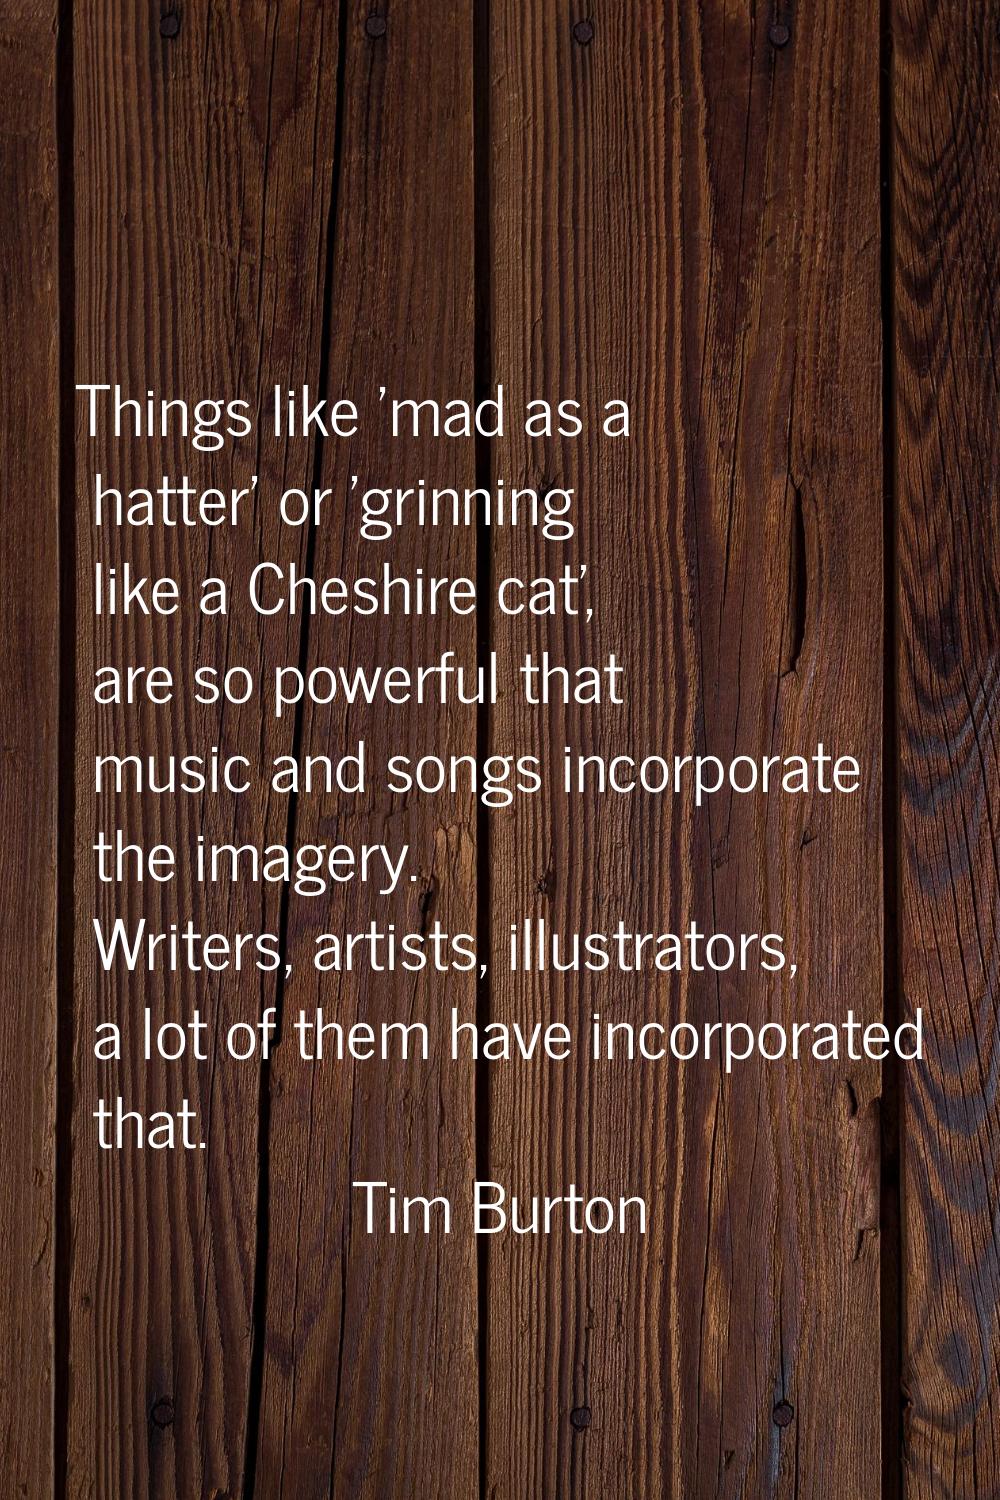 Things like 'mad as a hatter' or 'grinning like a Cheshire cat', are so powerful that music and son